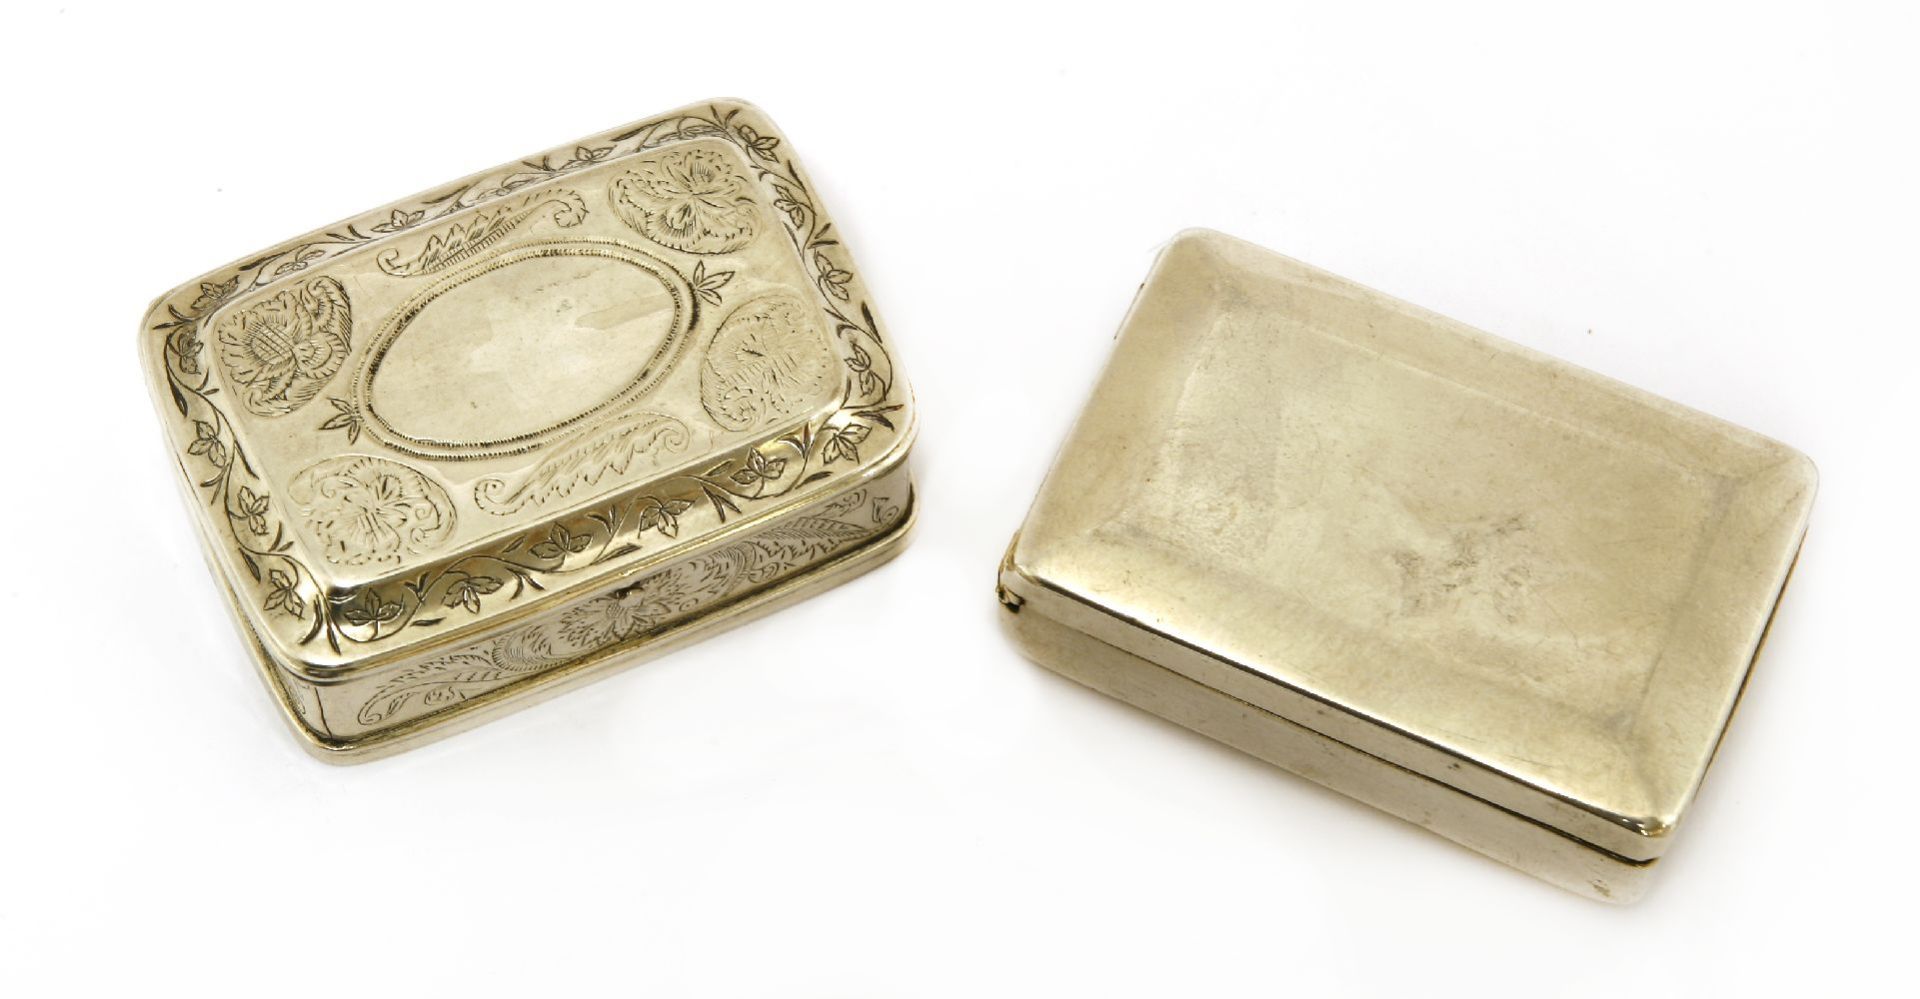 A George III silver box,1802, anda silver snuff box,unmarked, 18th century, Continental,3ozt